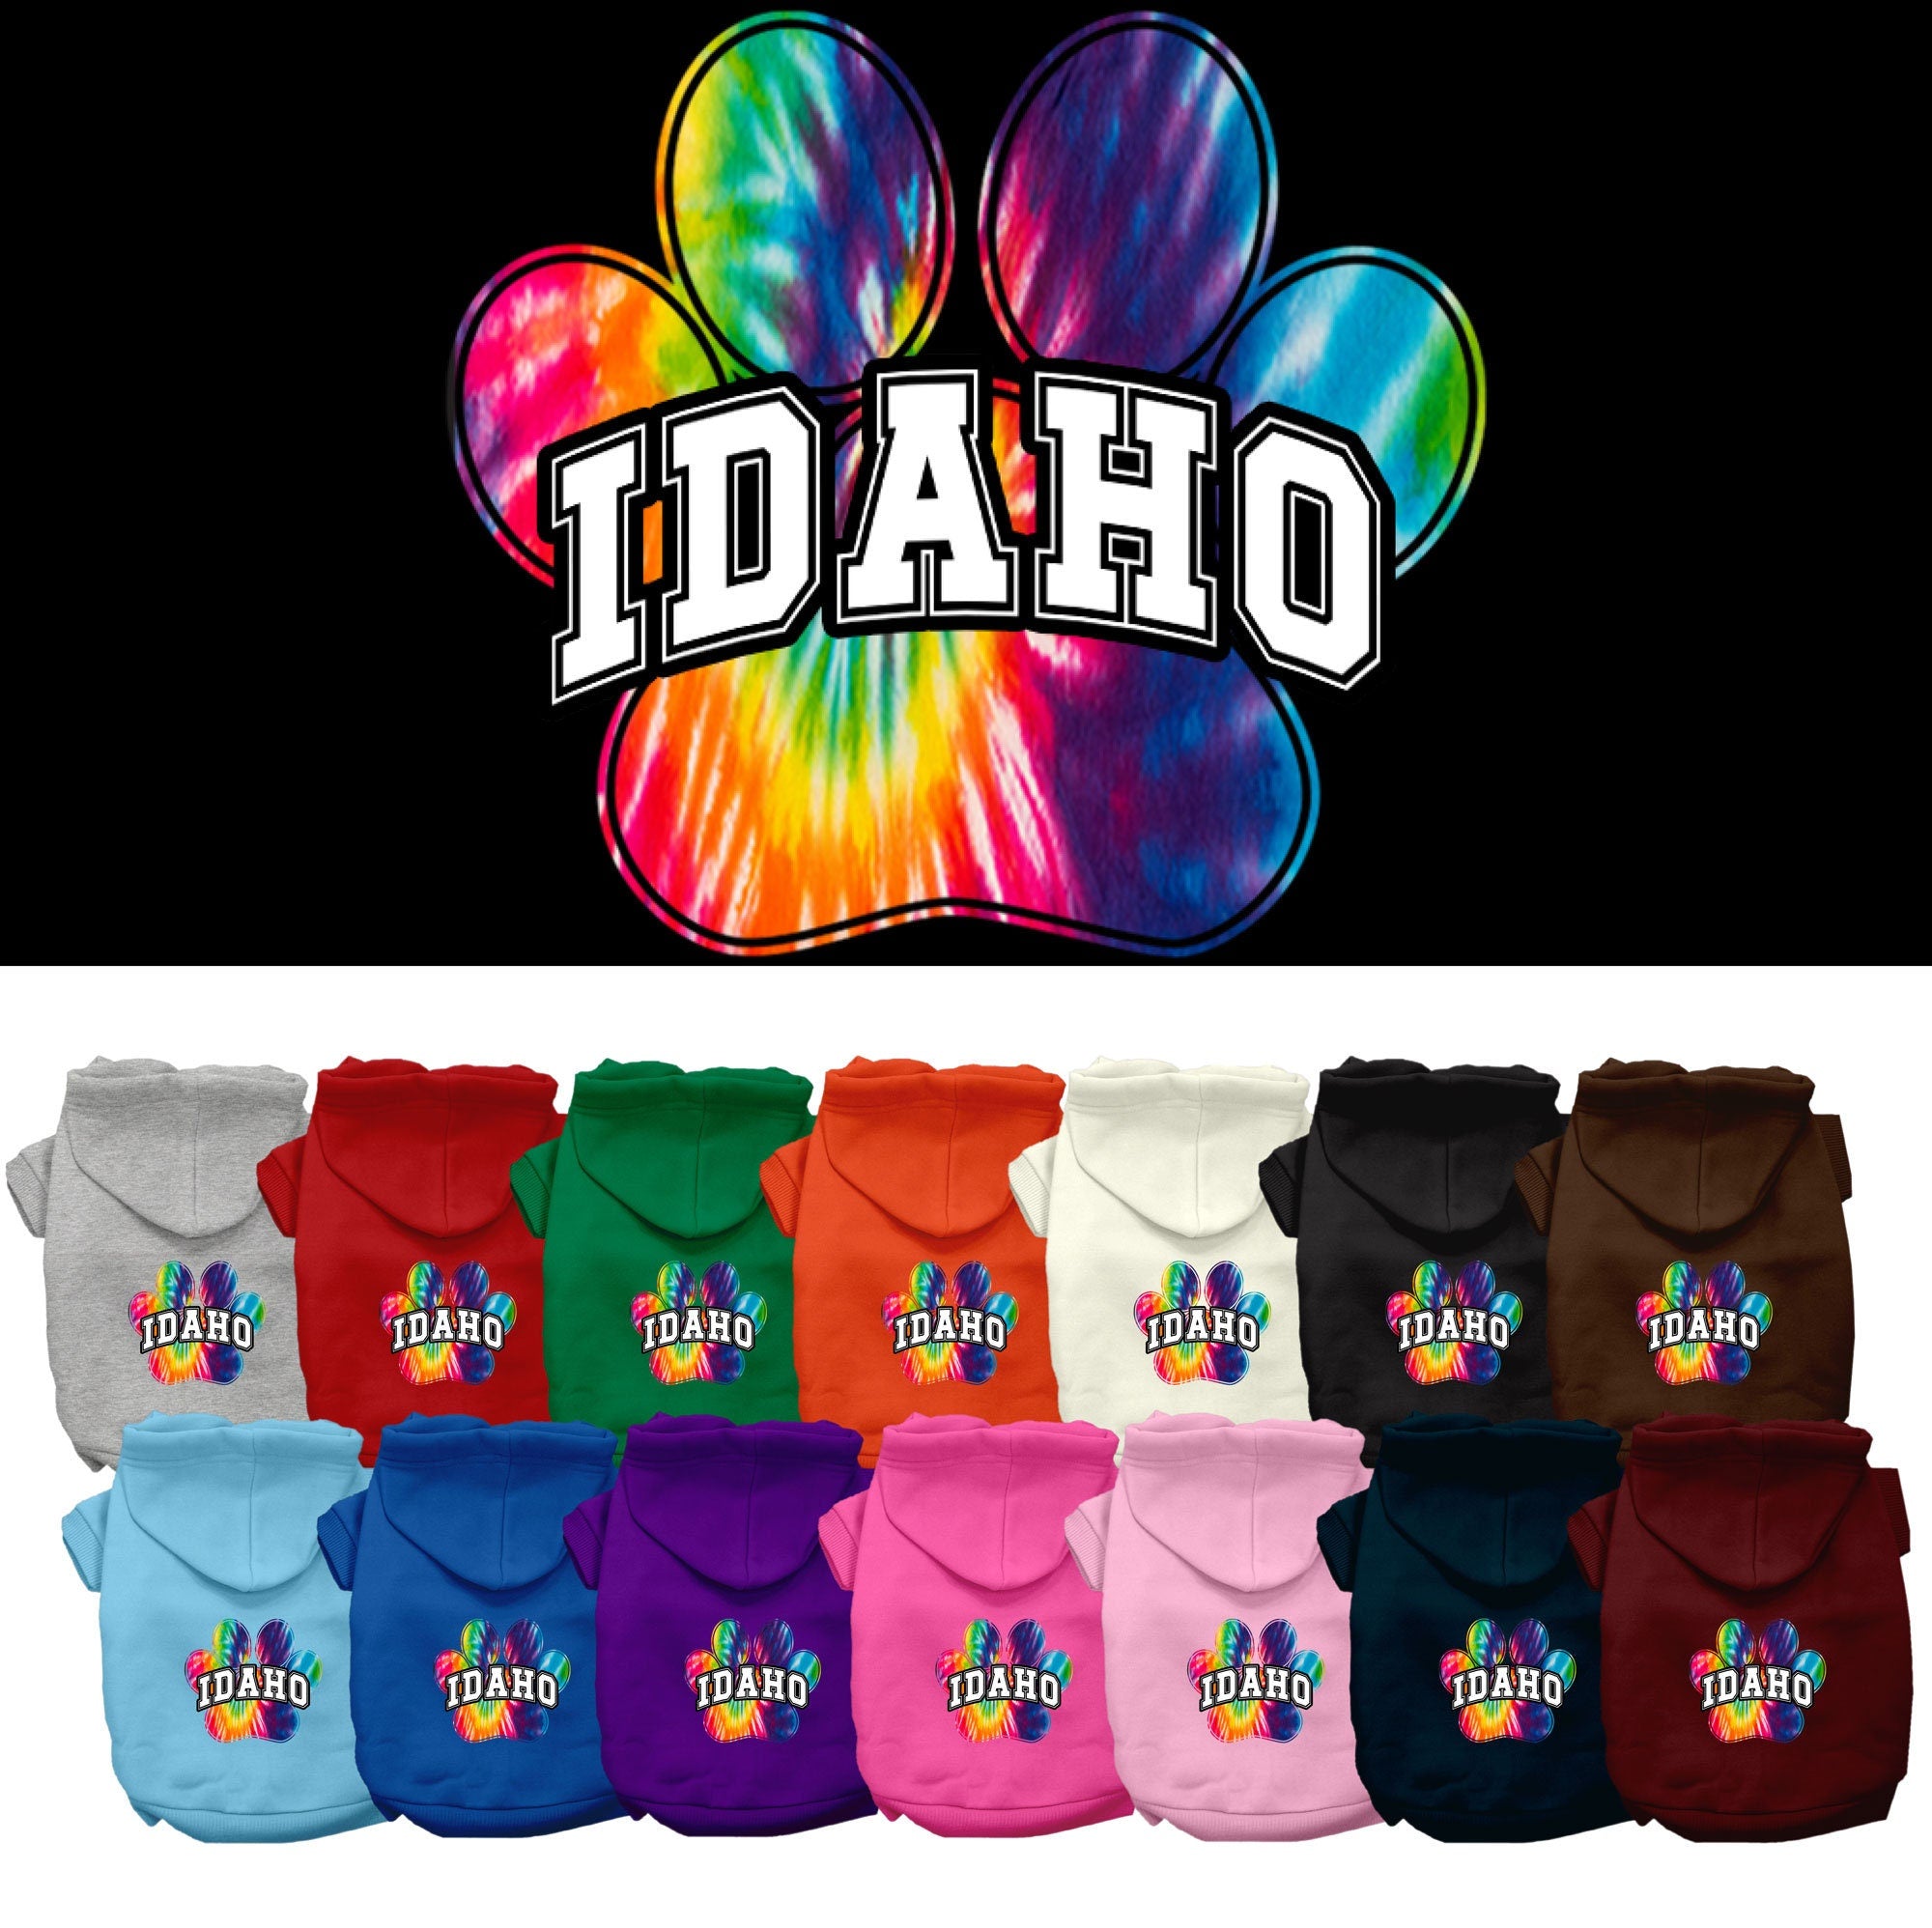 Pet Dog & Cat Screen Printed Hoodie for Small to Medium Pets (Sizes XS-XL), &quot;Idaho Bright Tie Dye&quot;